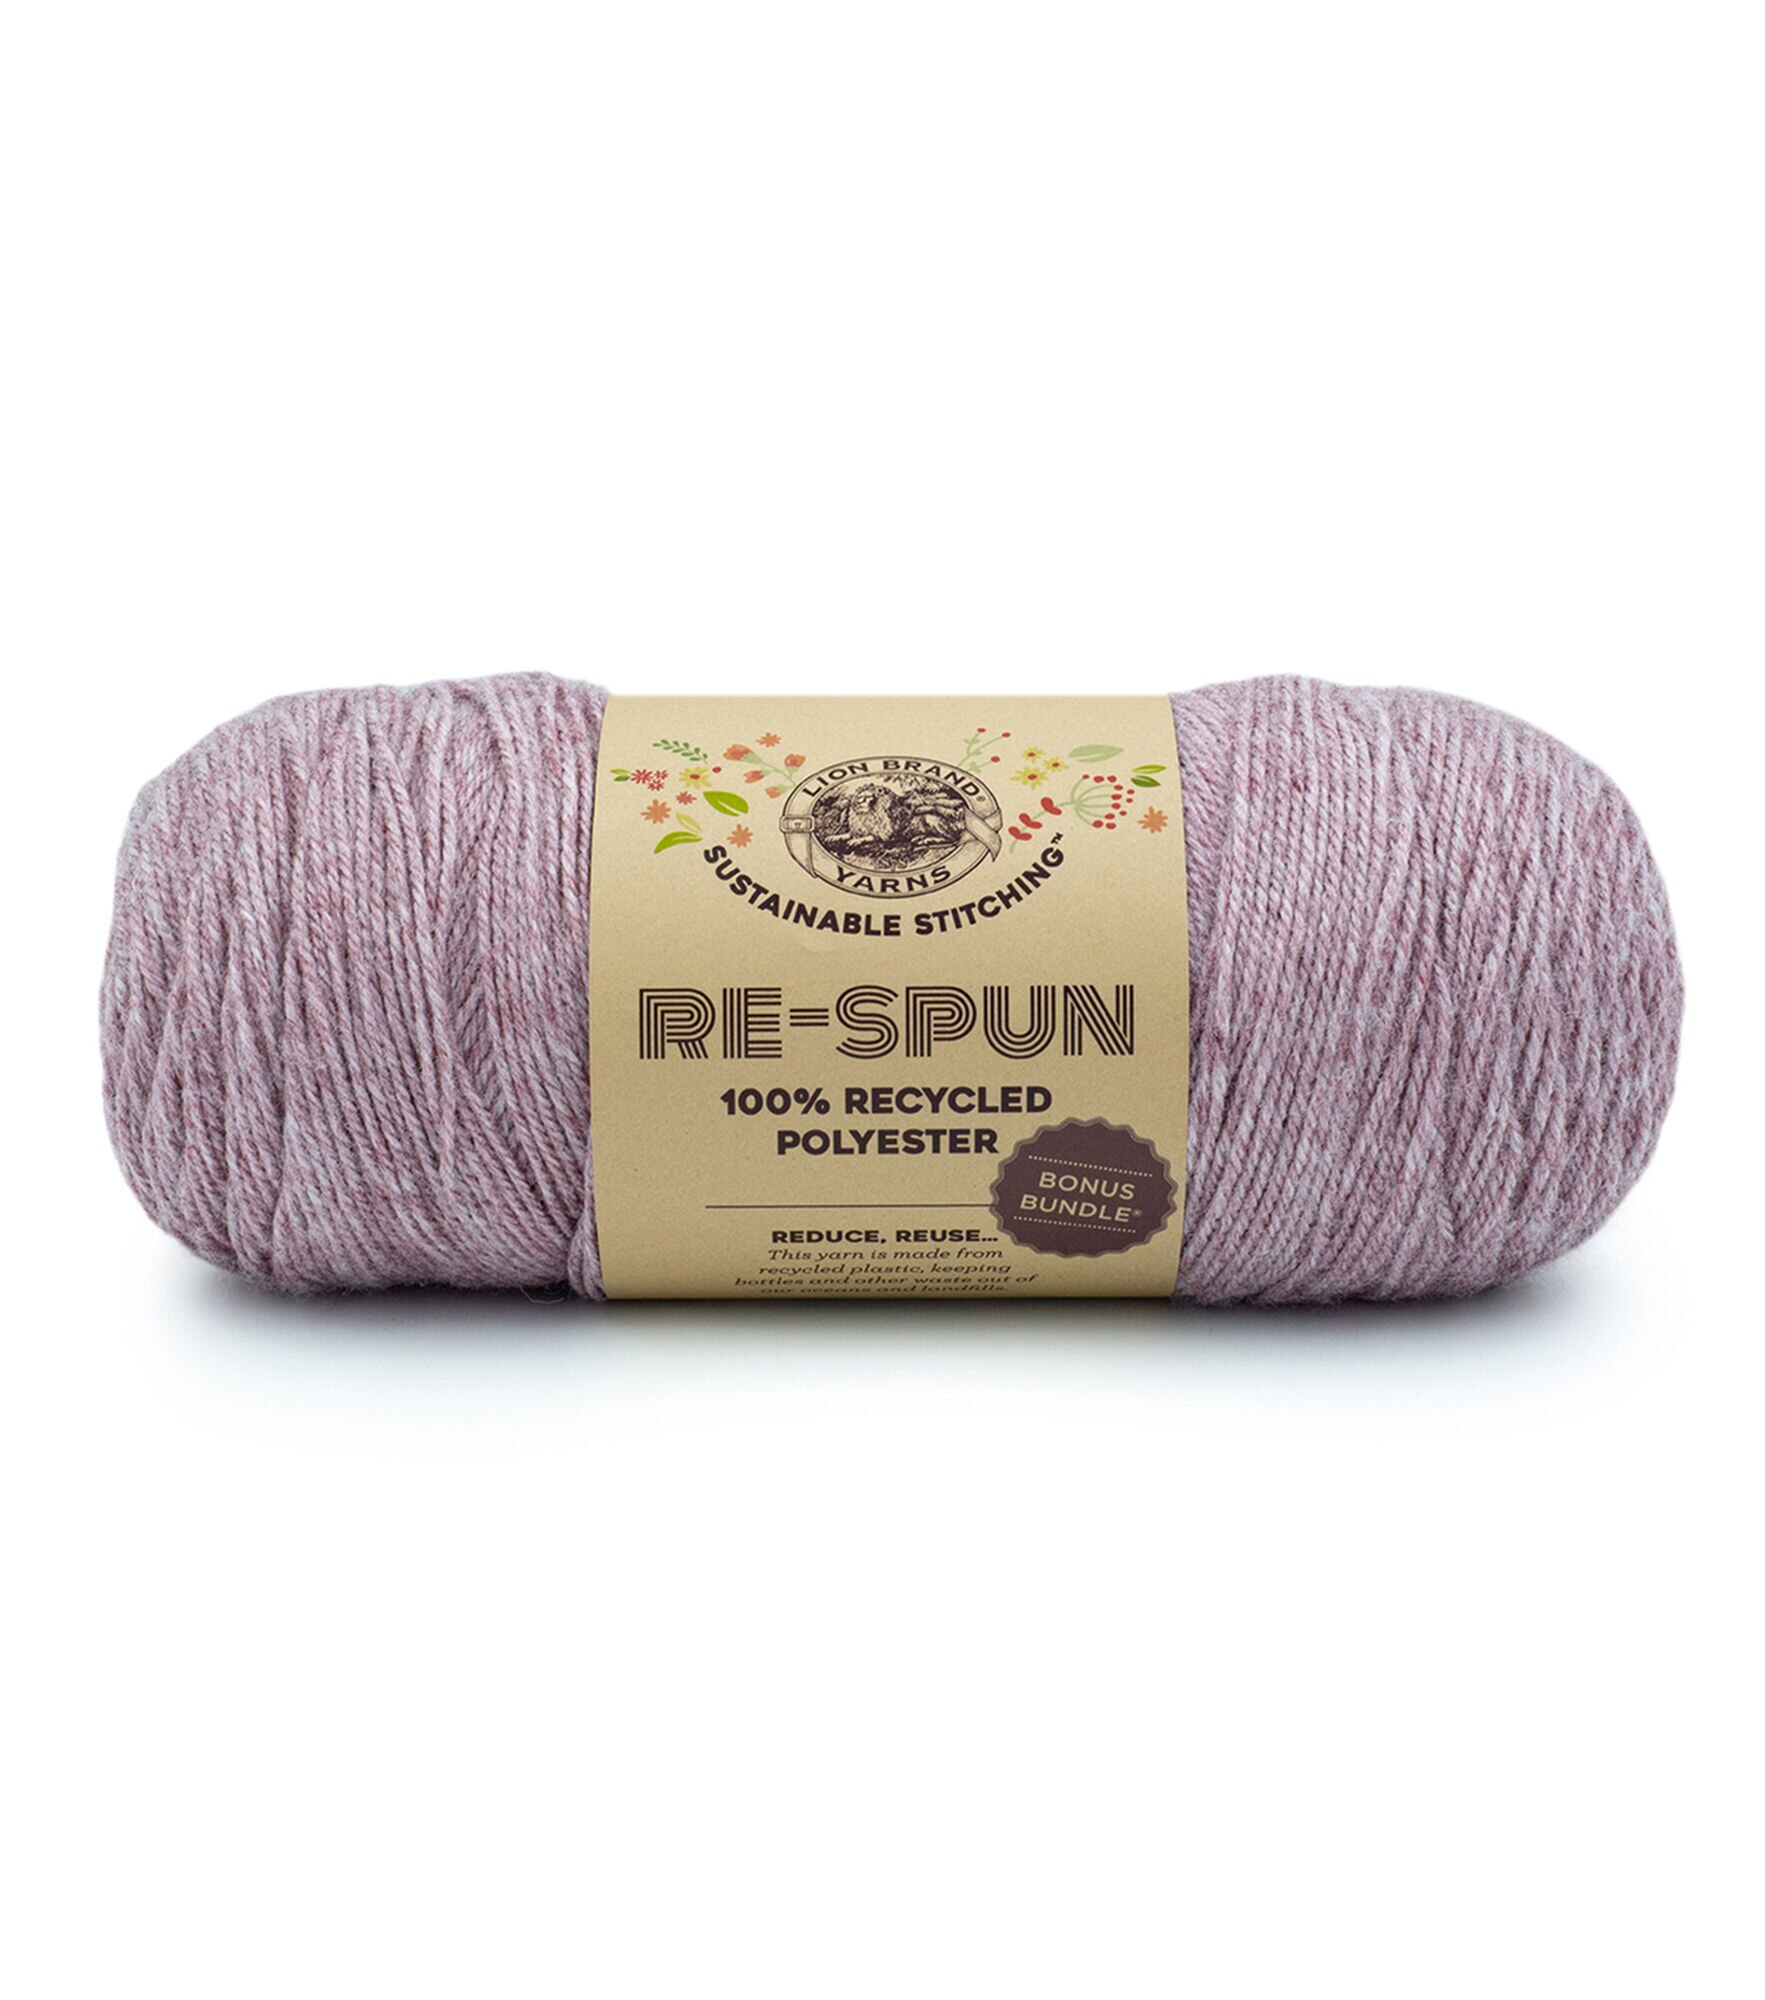 Lion Brand Vanna's Choice Yarn in Canada, Free Shipping at